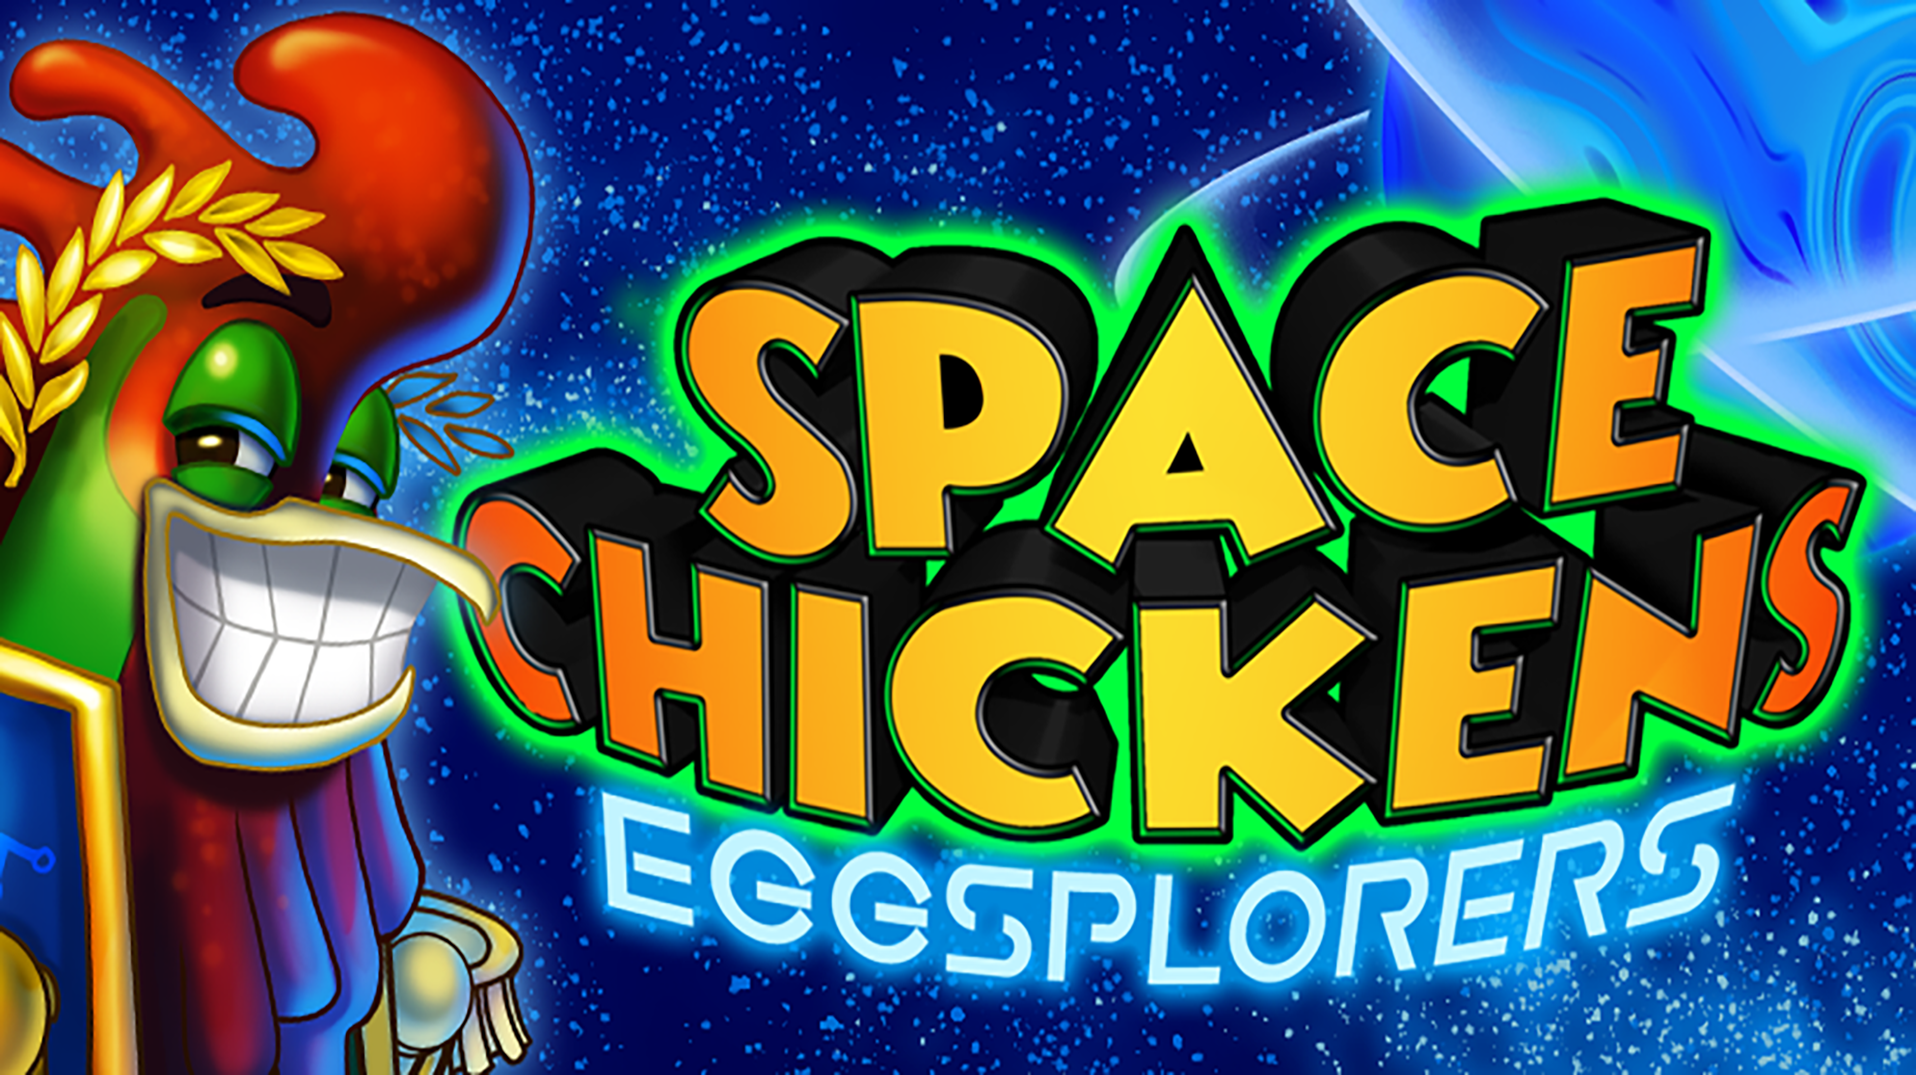 Picture for Space Chickens Eggsplorers